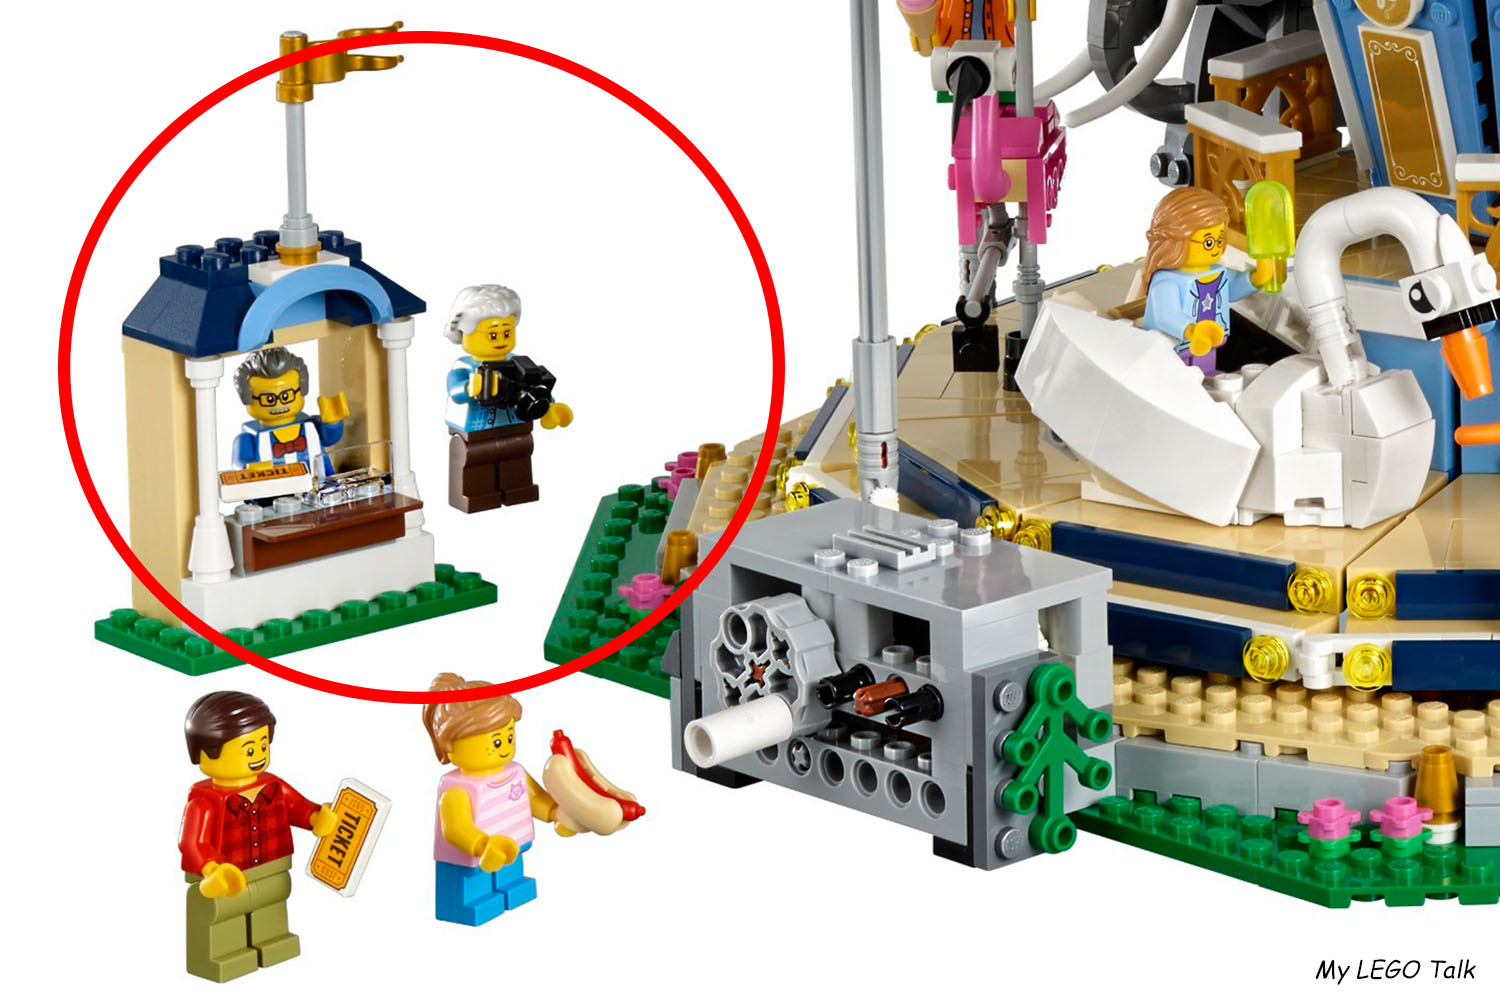 Carousel 10257 vs. Carousel 10196 Find 8 differences ! :-) - My Lego Talk